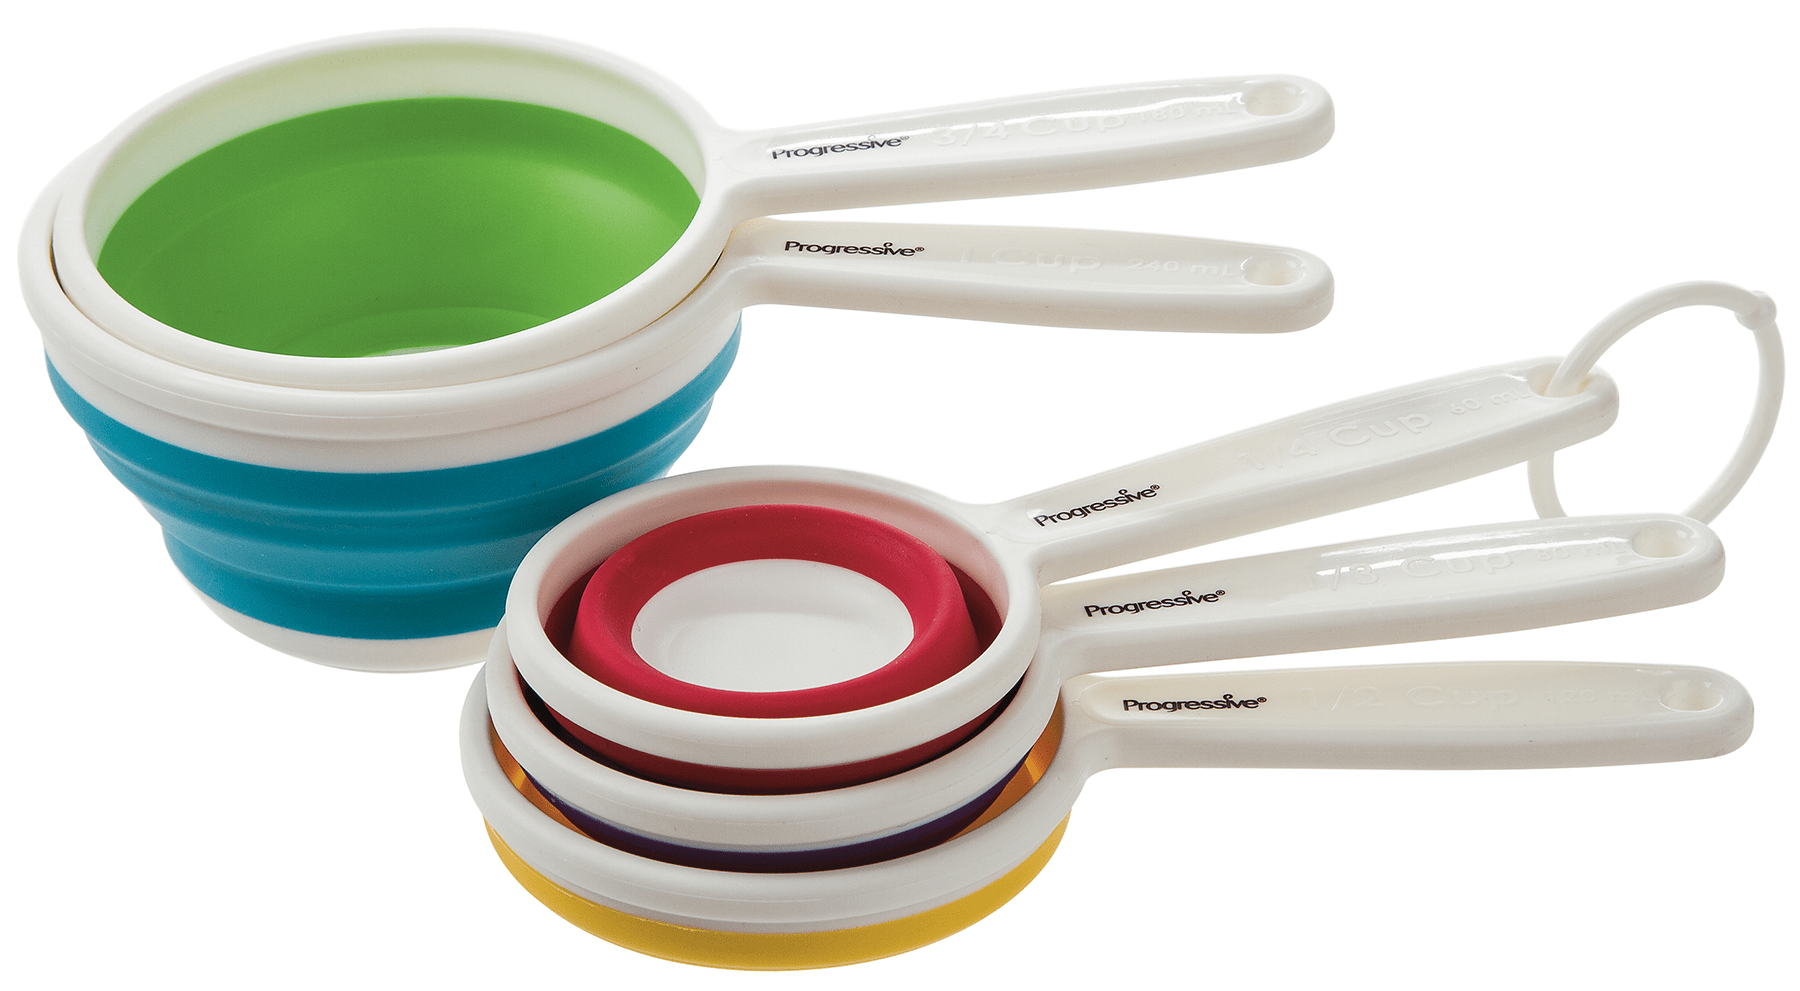 Prepworks: Collapsible Measuring Cups camping kitchenware 